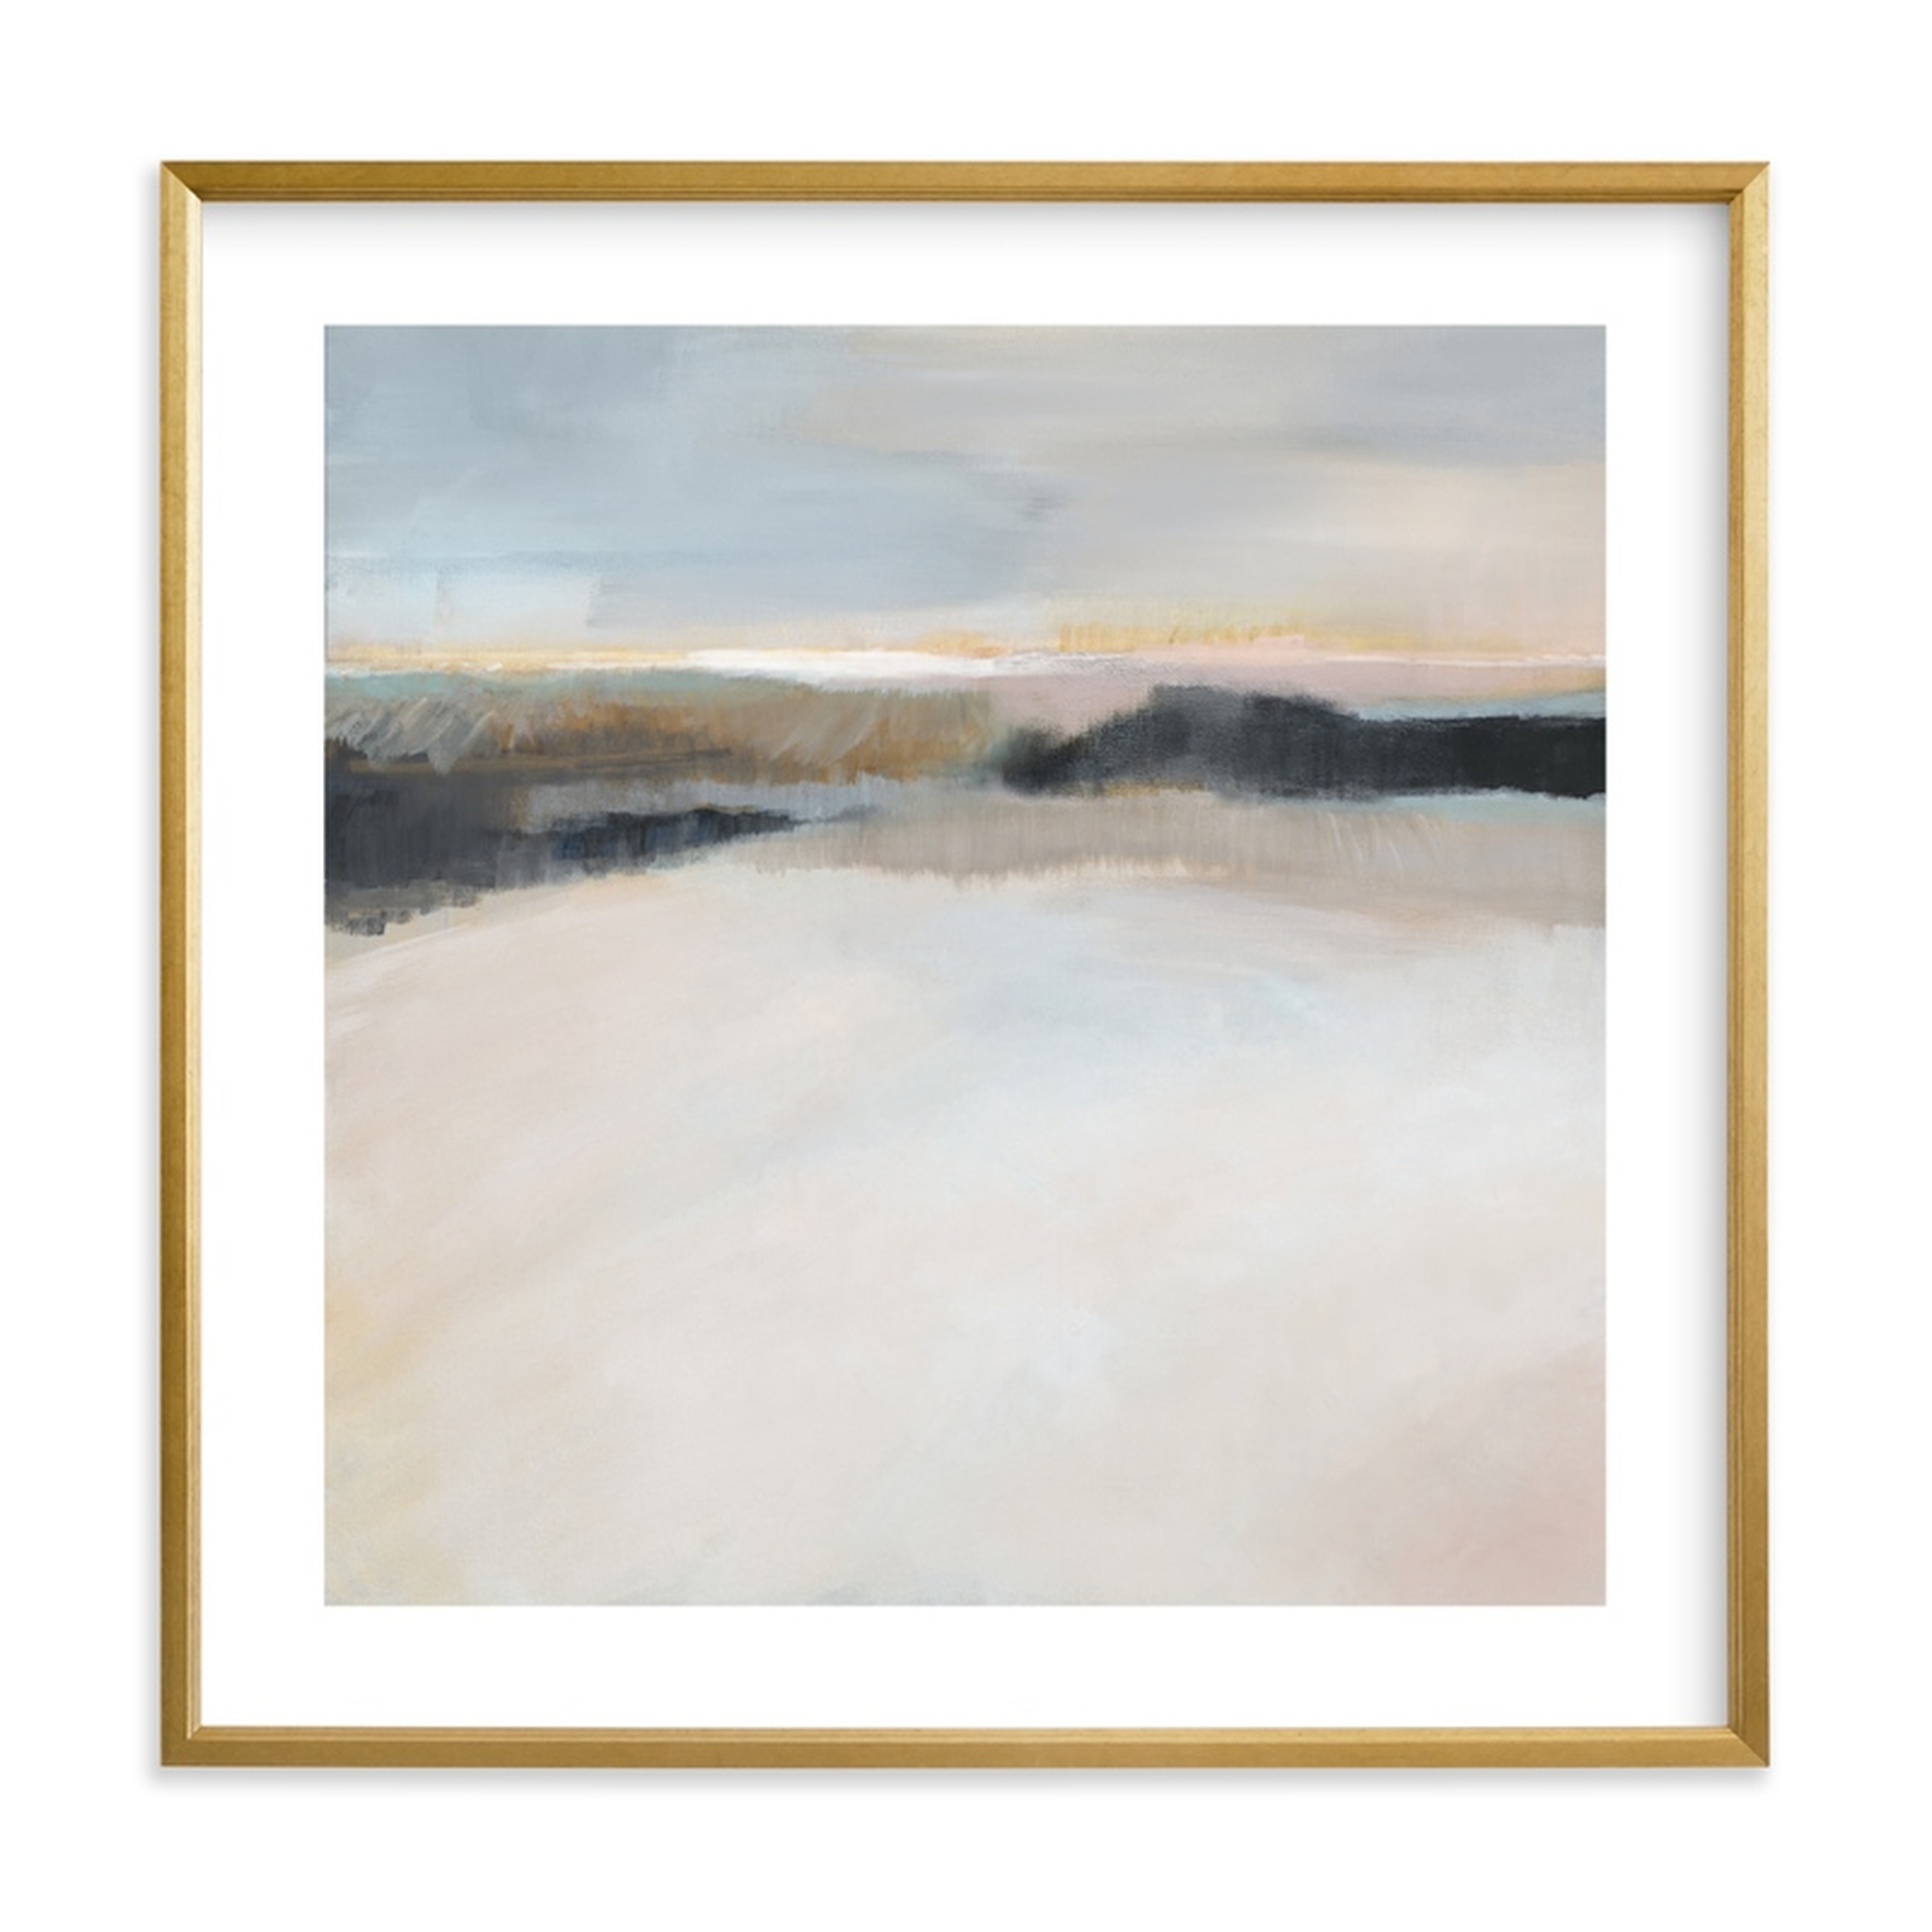 A Winter's Walk  - 24" x 24" - Gilded Wood Frame - White Border - Minted